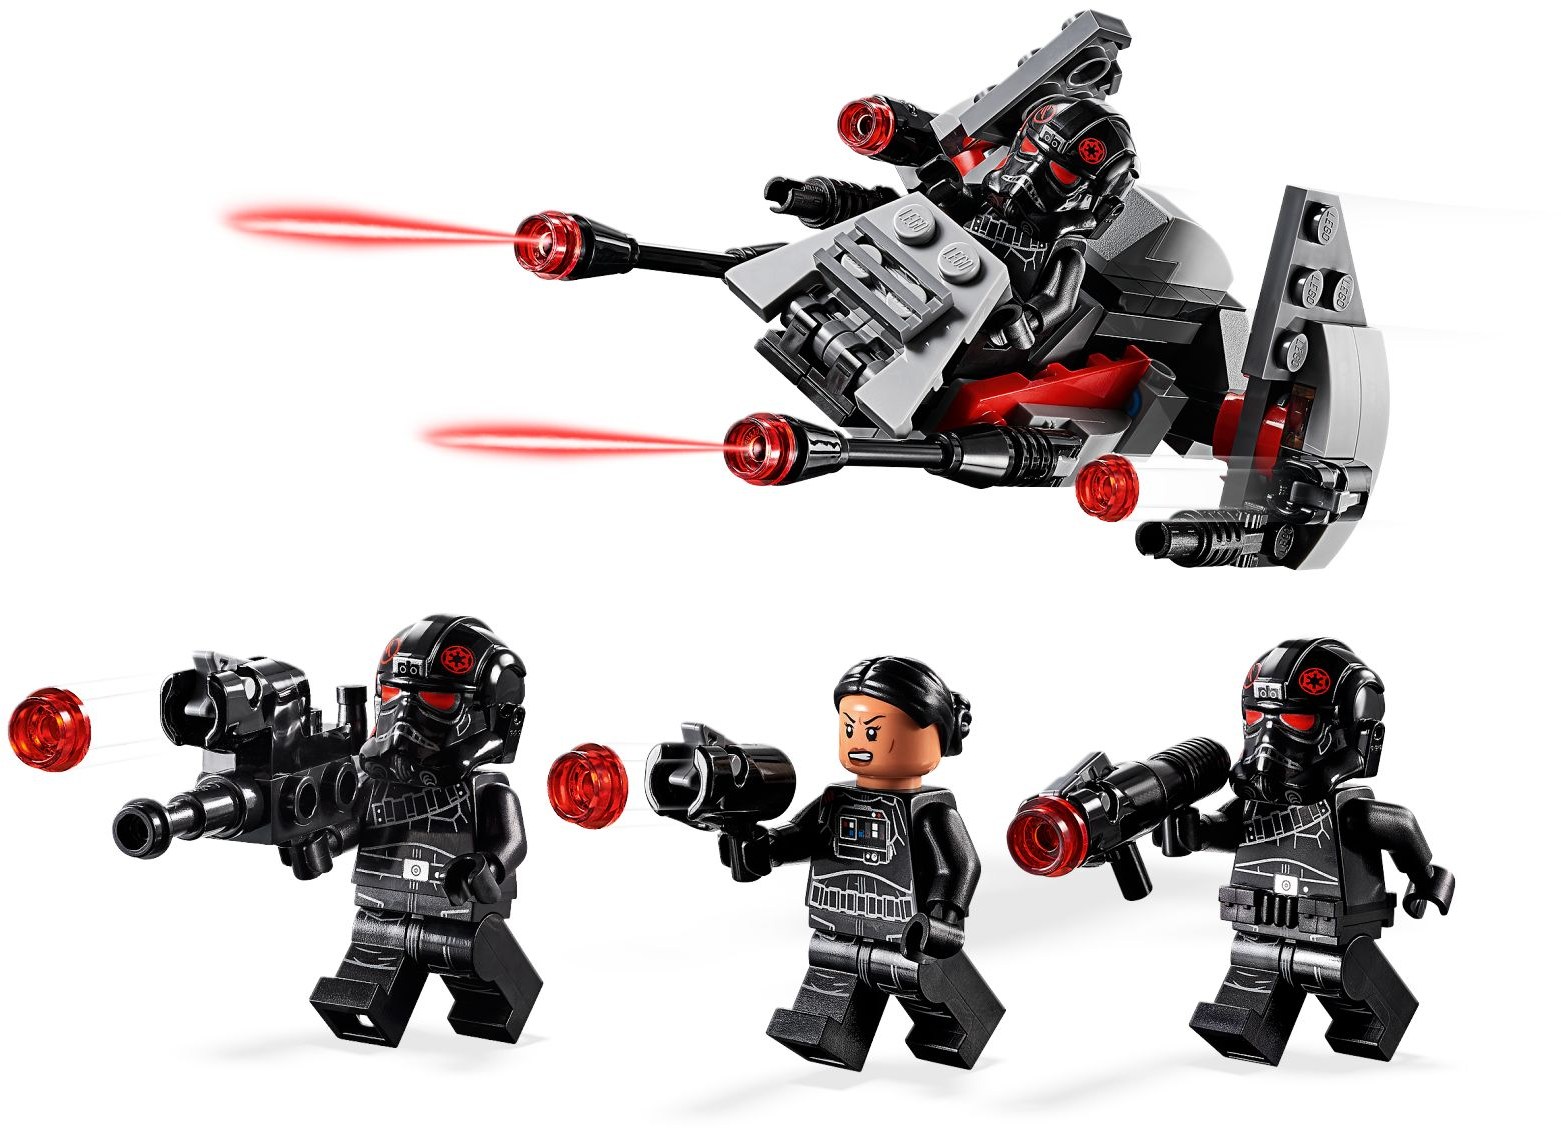 Brand New Lego Star Wars Inferno Squad Agent grimacing from set 75226 sw0988 NEW 